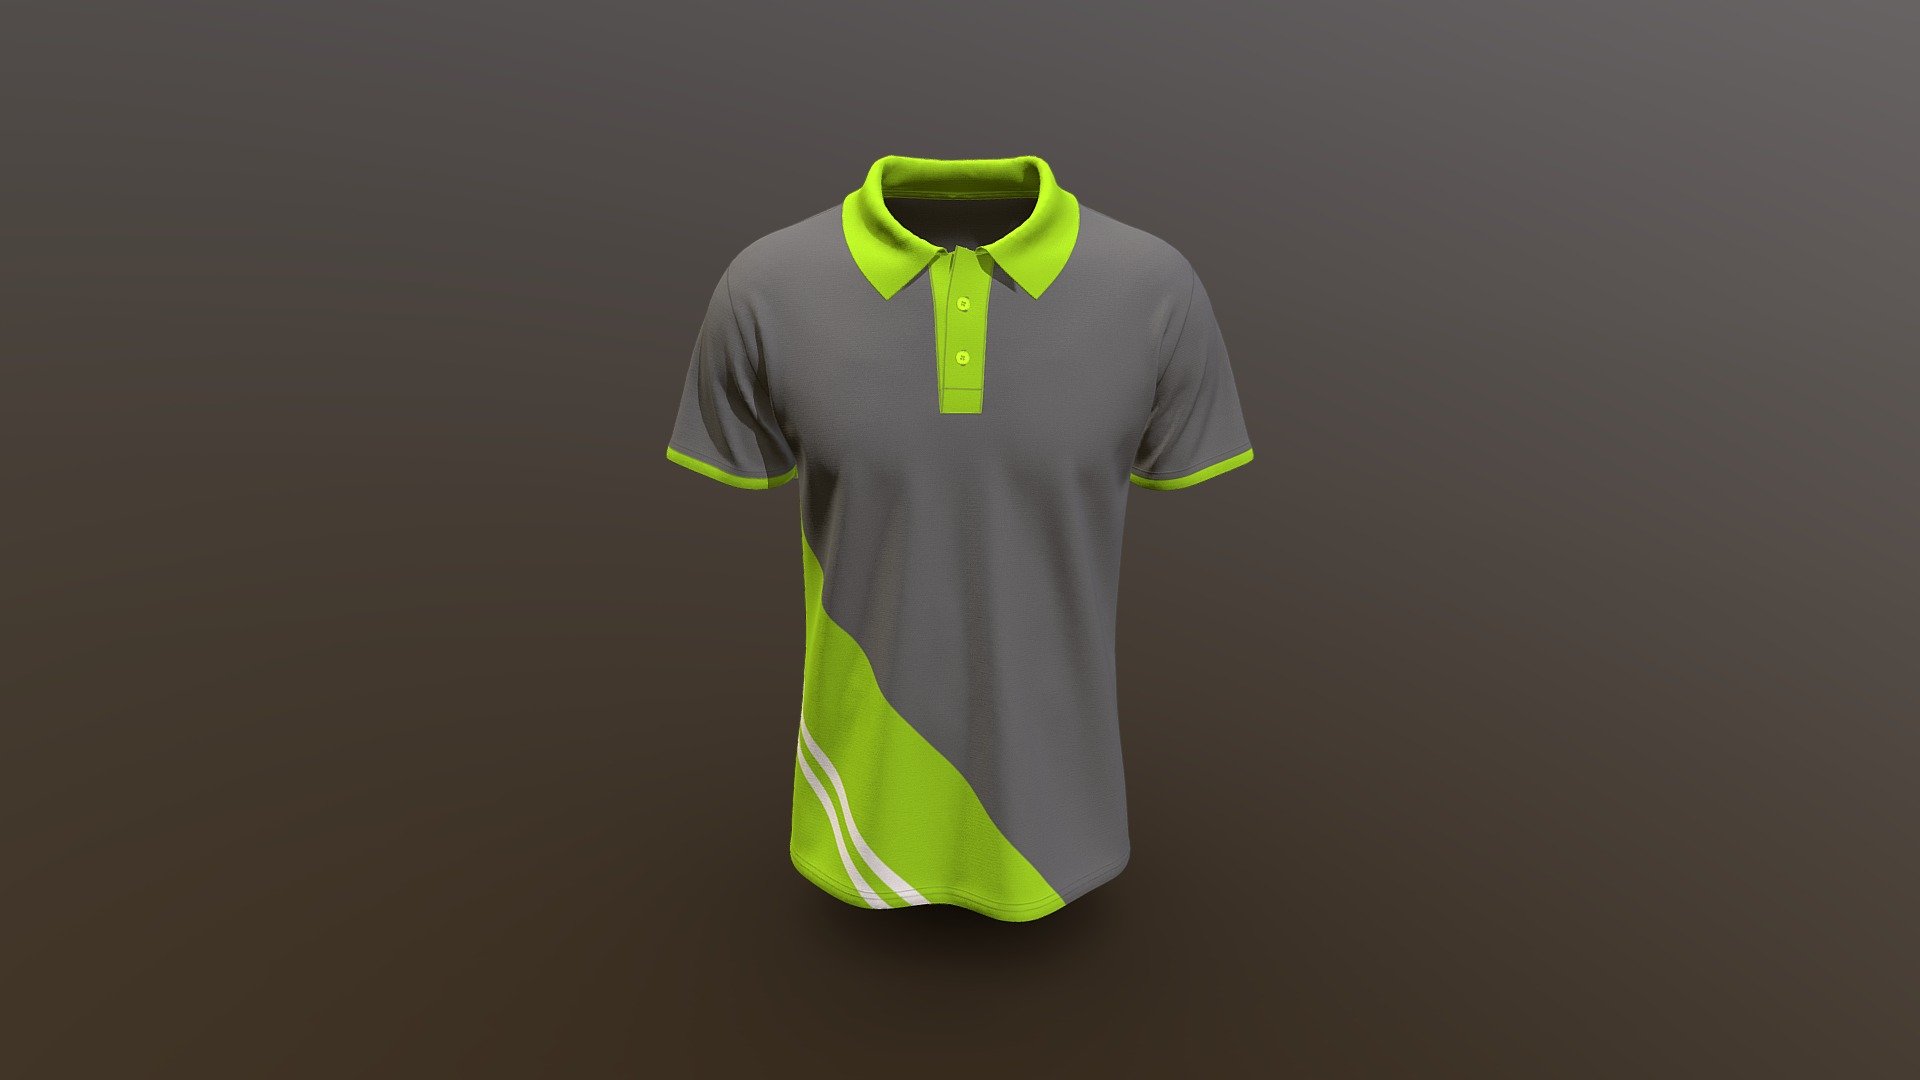 Cloth Title = Fashion Polo Design 3D Look 

SKU = DG100201 

Category = Men 

Product Type = Polo 

Cloth Length = Regular 

Body Fit = Regular Fit 

Occasion = Casual  

Sleeve Style = Short Sleeve 


Our Services:

3D Apparel Design.

OBJ,FBX,GLTF Making with High/Low Poly.

Fabric Digitalization.

Mockup making.

3D Teck Pack.

Pattern Making.

2D Illustration.

Cloth Animation and 360 Spin Video.


Contact us:- 

Email: info@digitalfashionwear.com 

Website: https://digitalfashionwear.com 


We designed all the types of cloth specially focused on product visualization, e-commerce, fitting, and production. 

We will design: 

T-shirts 

Polo shirts 

Hoodies 

Sweatshirt 

Jackets 

Shirts 

TankTops 

Trousers 

Bras 

Underwear 

Blazer 

Aprons 

Leggings 

and All Fashion items. 





Our goal is to make sure what we provide you, meets your demand 3d model